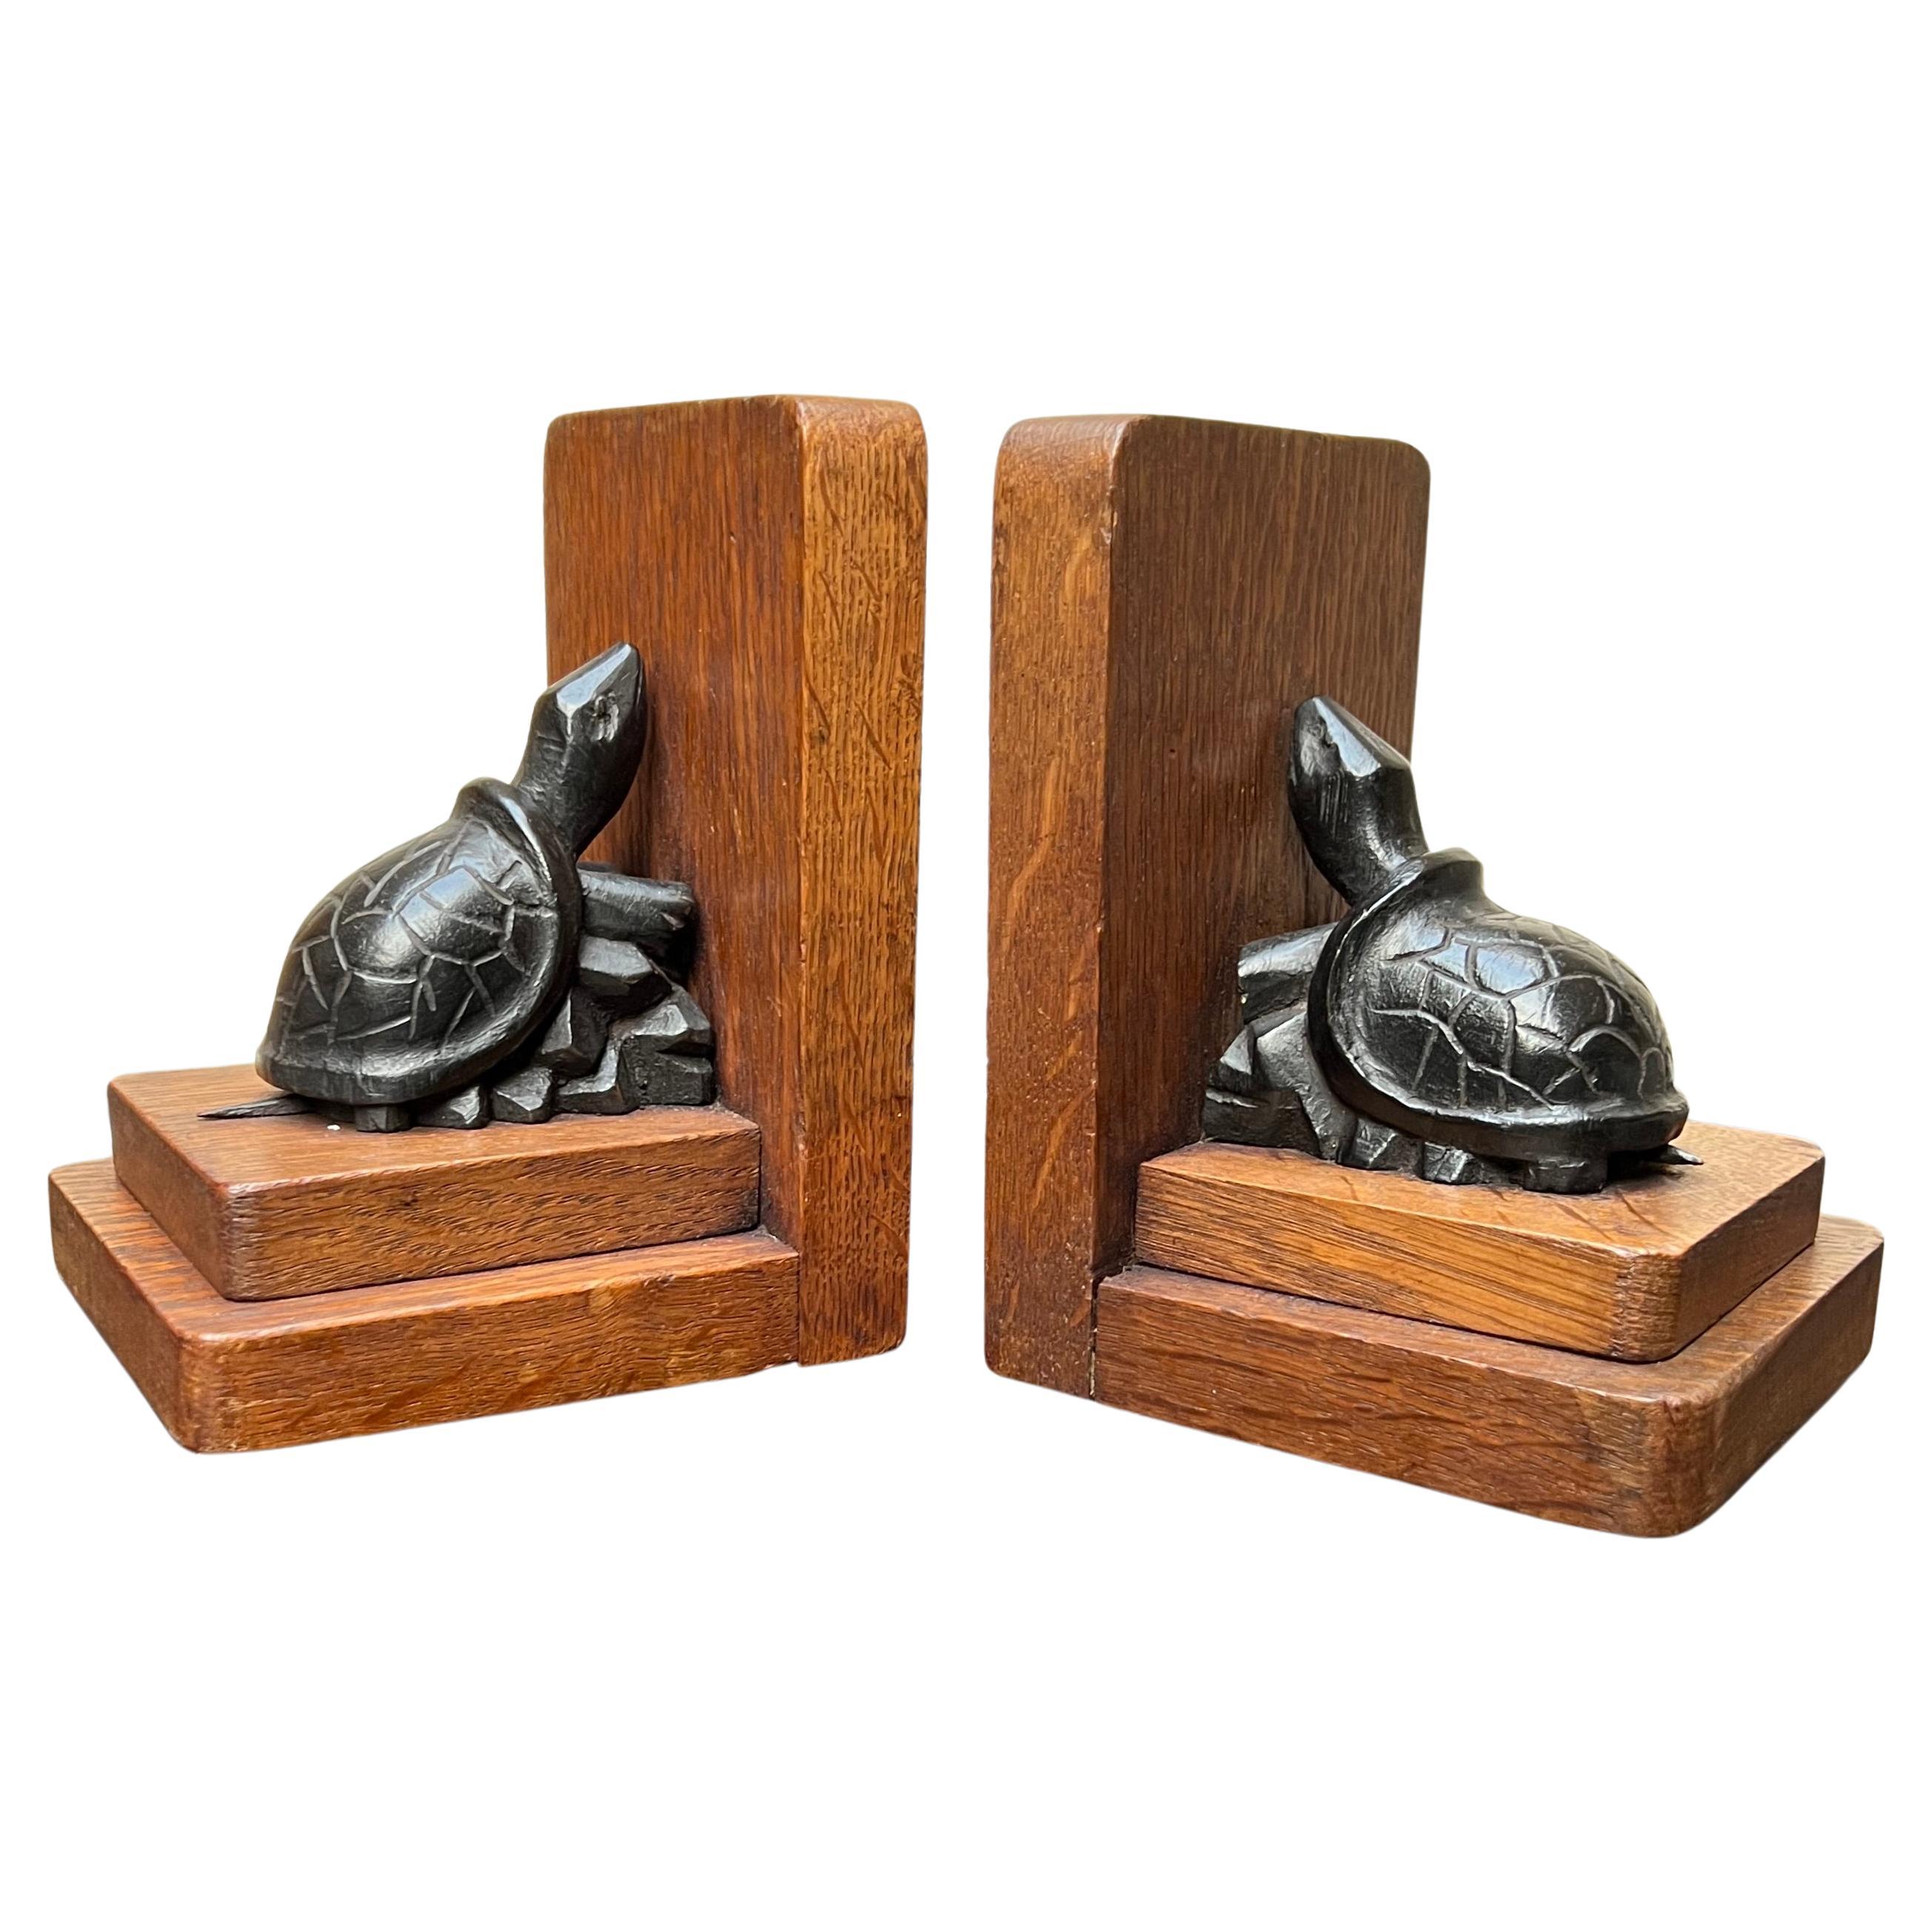 Lovely Pair of Hand Carved Art Deco Turtle Sculptures Out of Oakwood Bookends